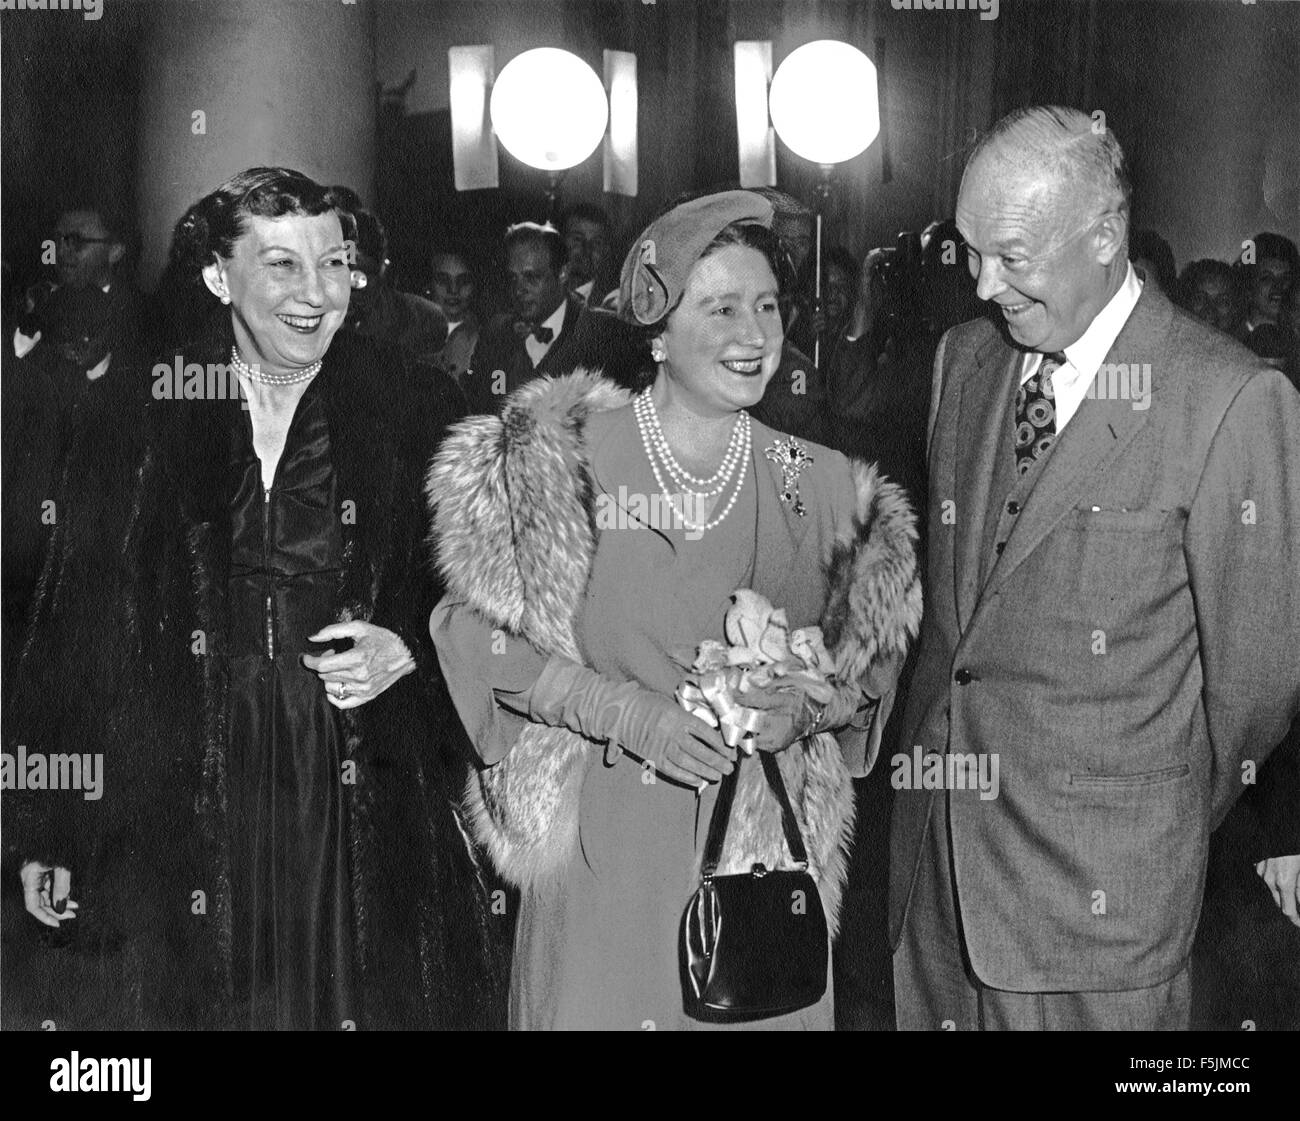 United States President Dwight D. Eisenhower, right, and first lady Mamie Eisenhower, left, welcome H.M. Queen Elizabeth, The Queen Mother of Great Britain, center, to the White House in Washington, DC for a dinner in her honor on November 4, 1954. Mandatory Credit: Abbie Rowe/National Park Service via CNP - NO WIRE SERVICE - Stock Photo